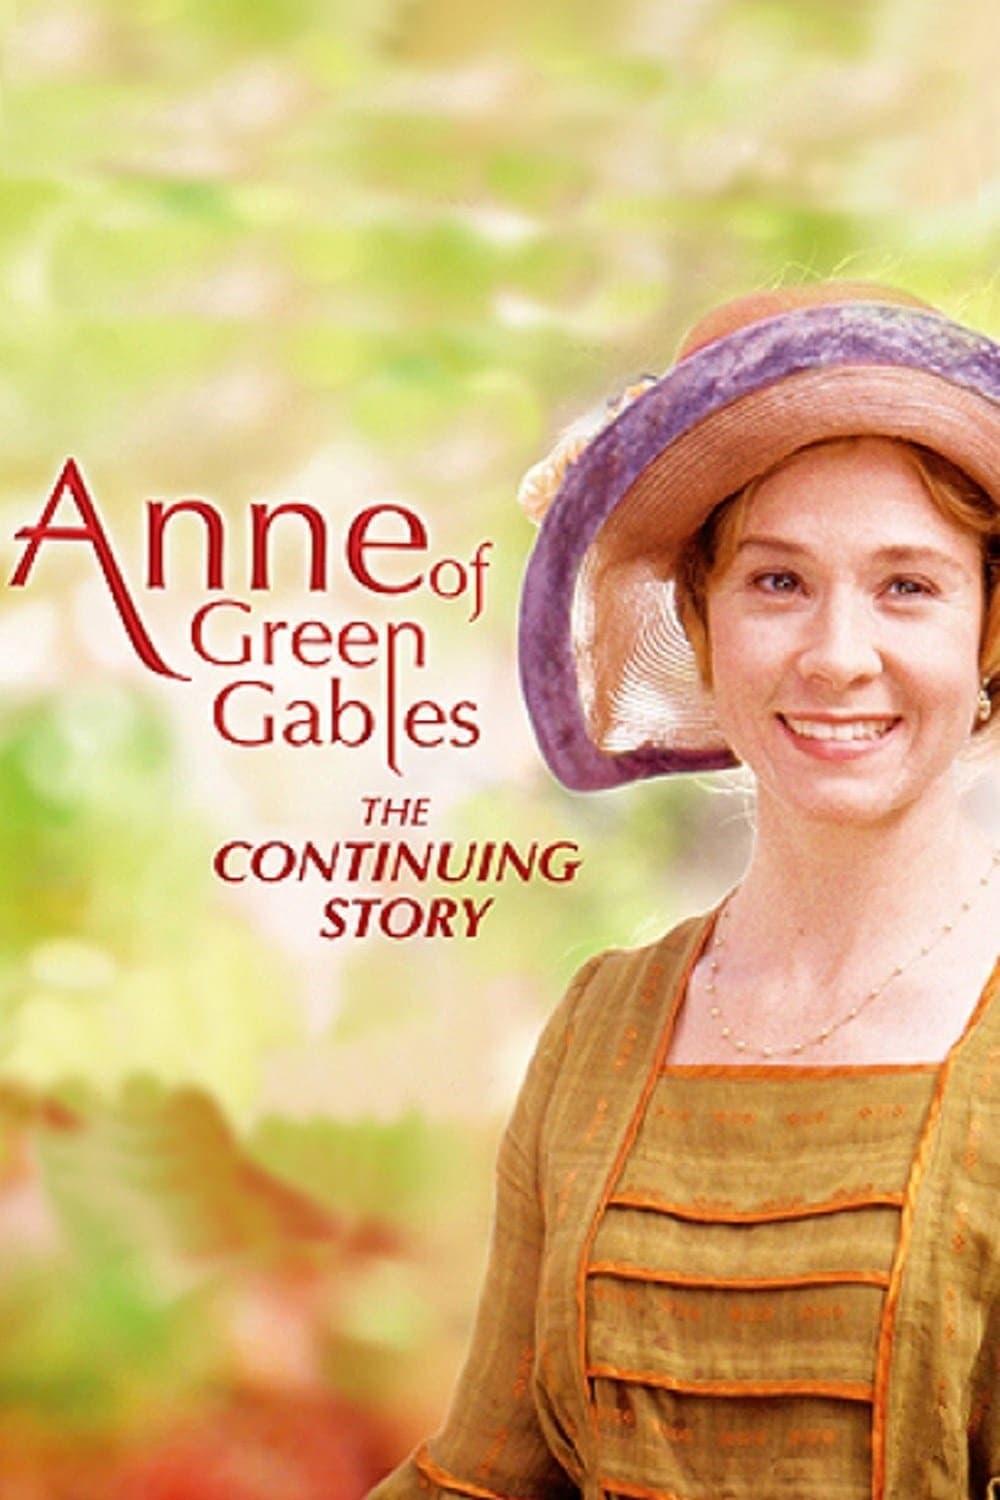 Anne of Green Gables: The Continuing Story poster